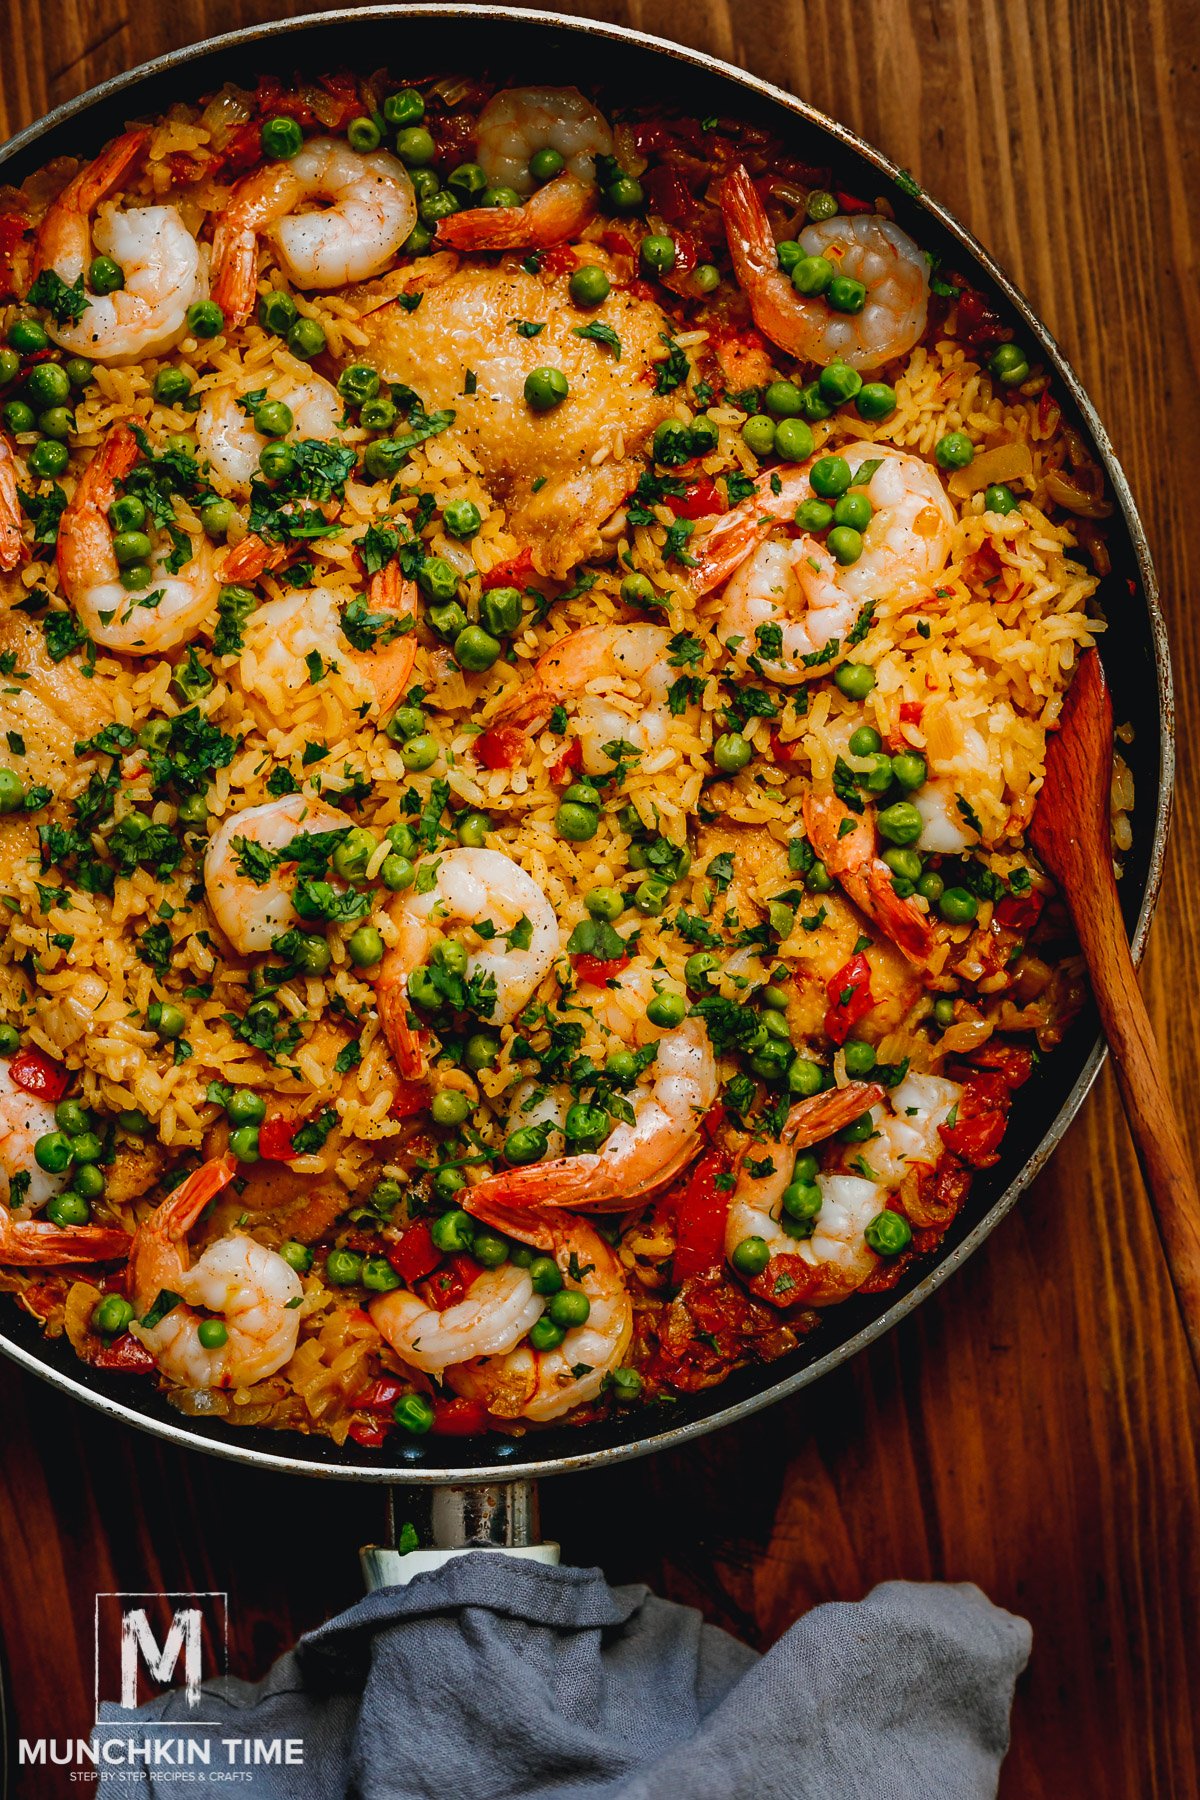 Chicken and Shrimp Paella inside the skillet, ready to be eaten.